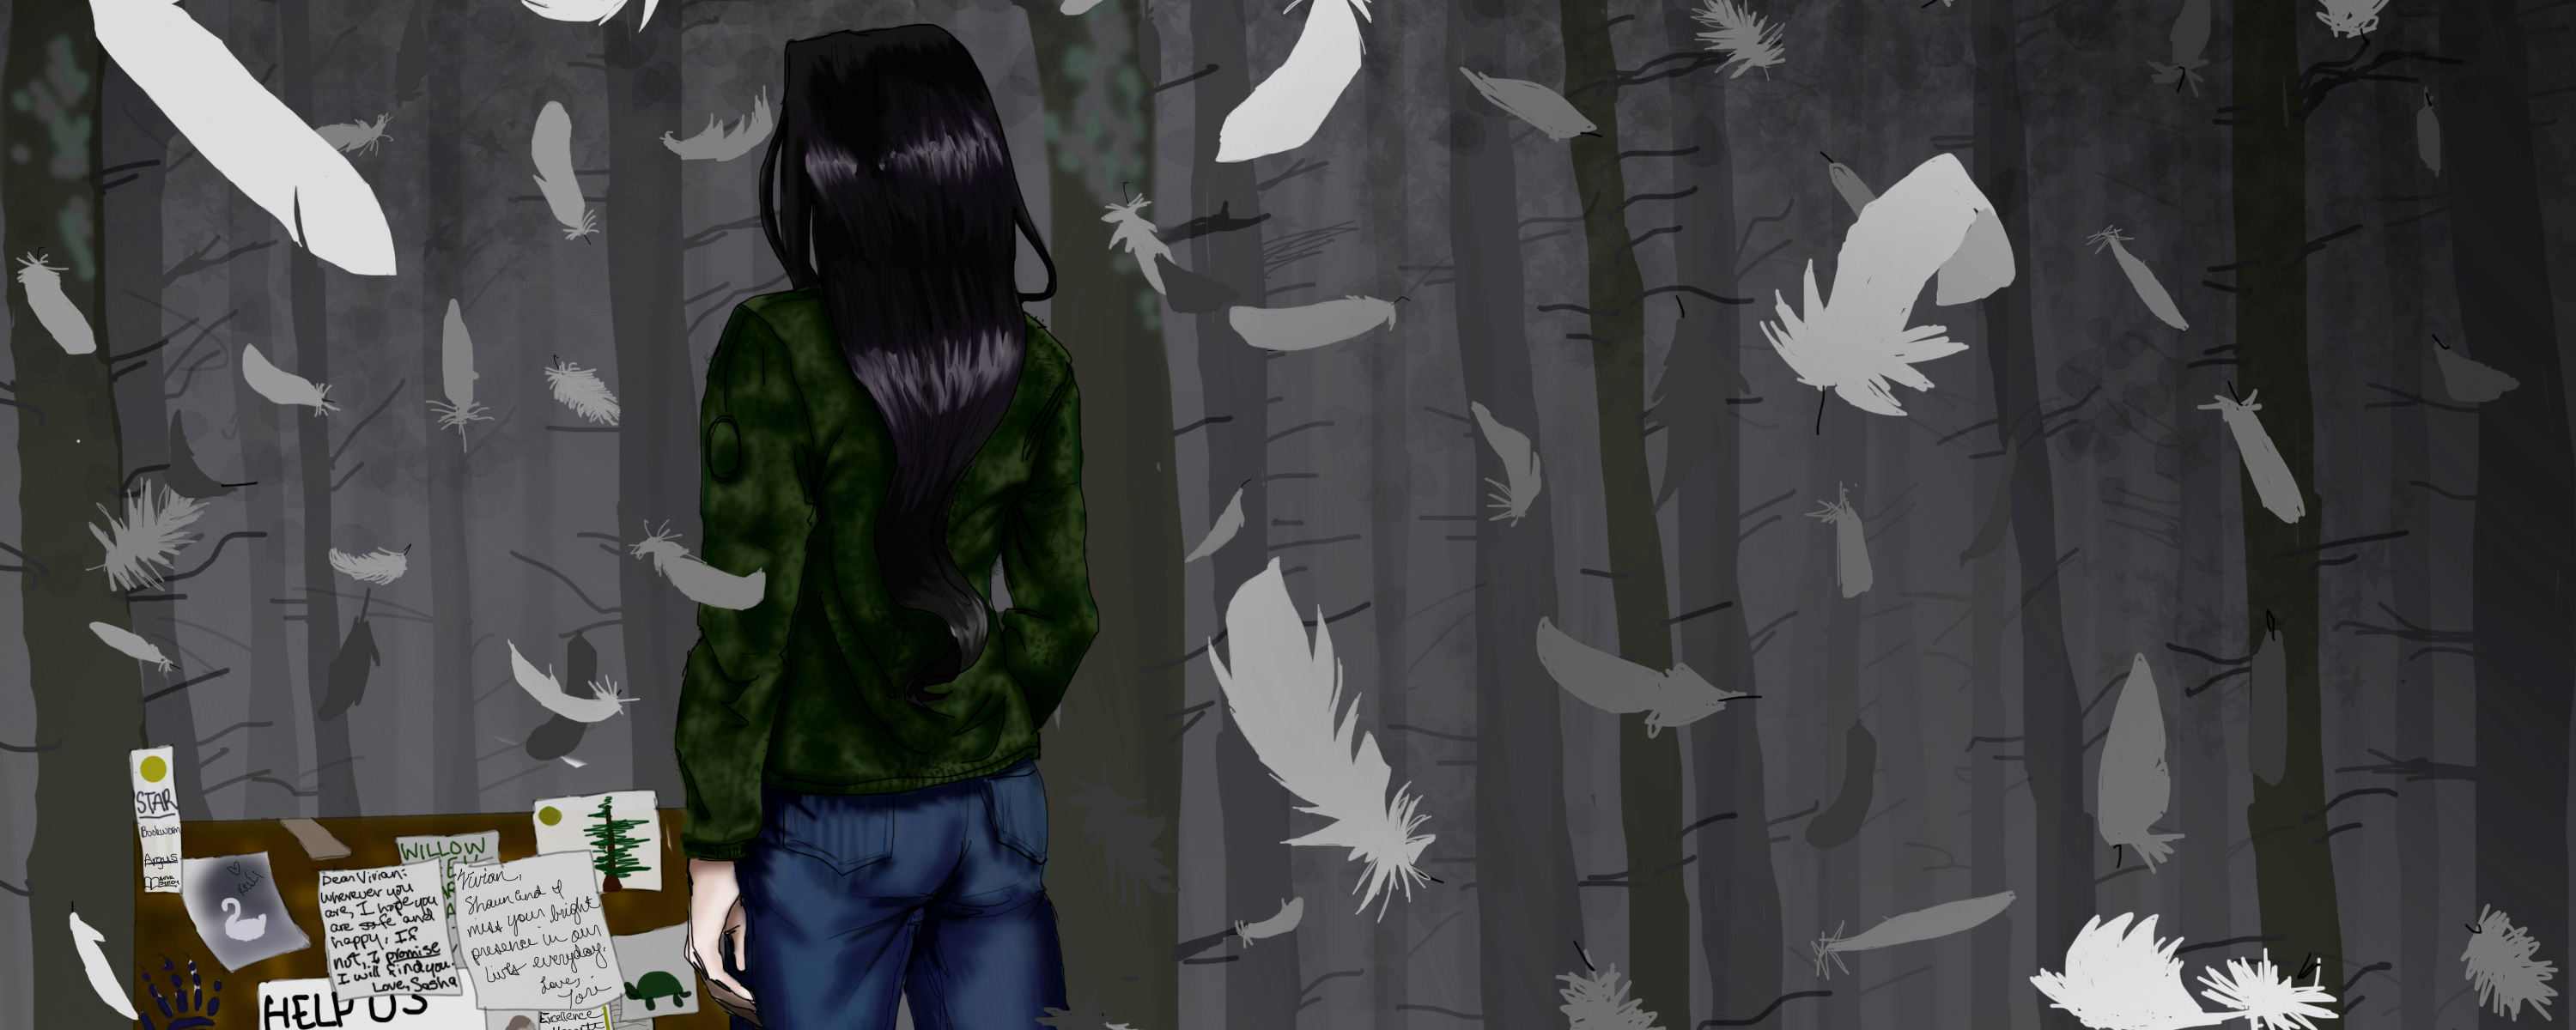 Illustration of a person in the woods with feathers falling from the sky